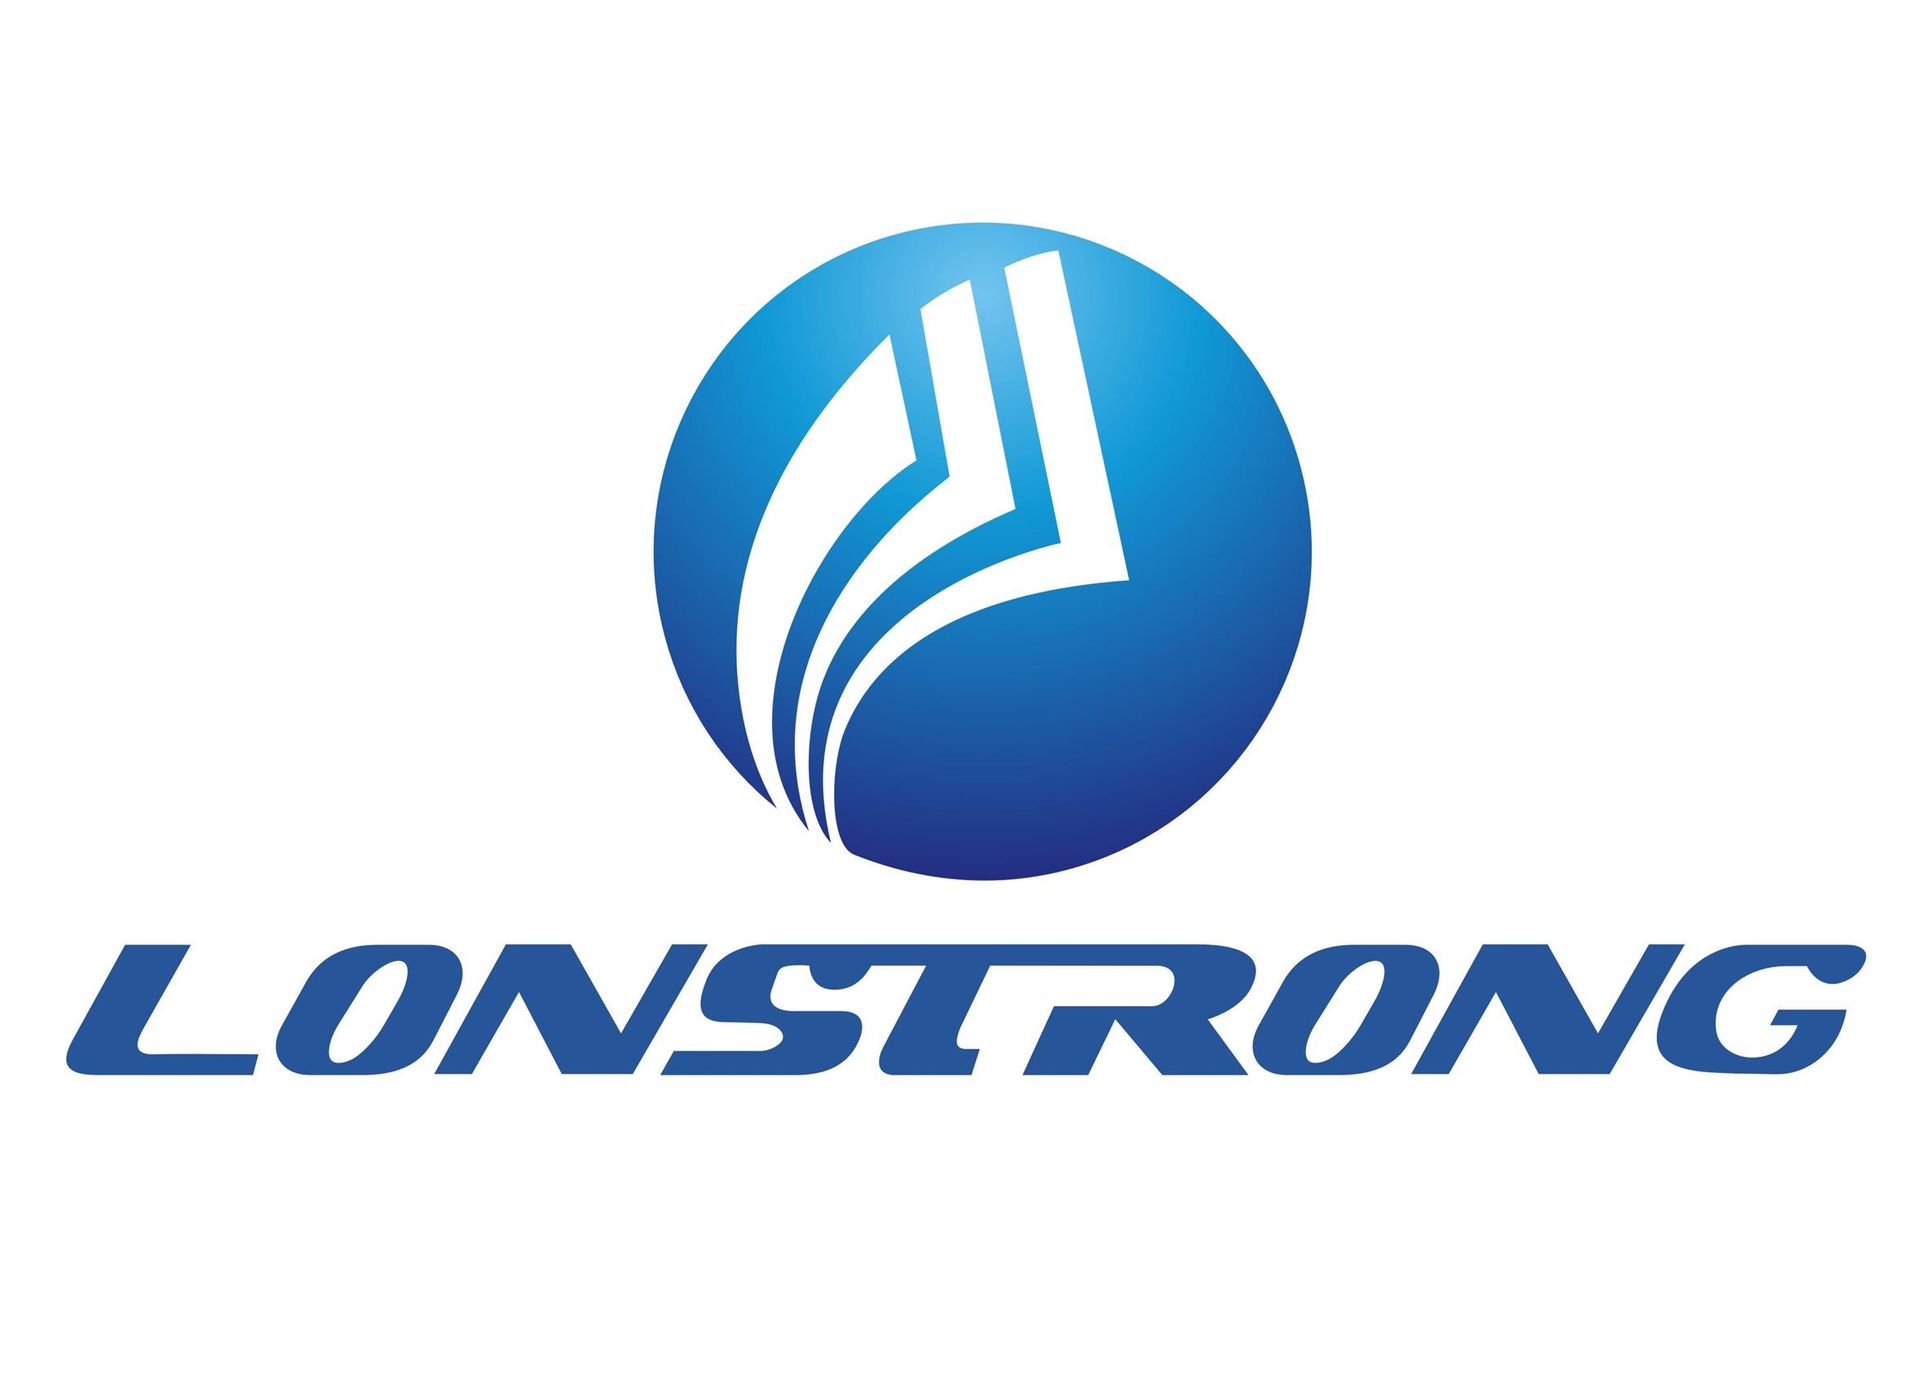 LONSTRONG IMP AND EXP CO., LTD. logo